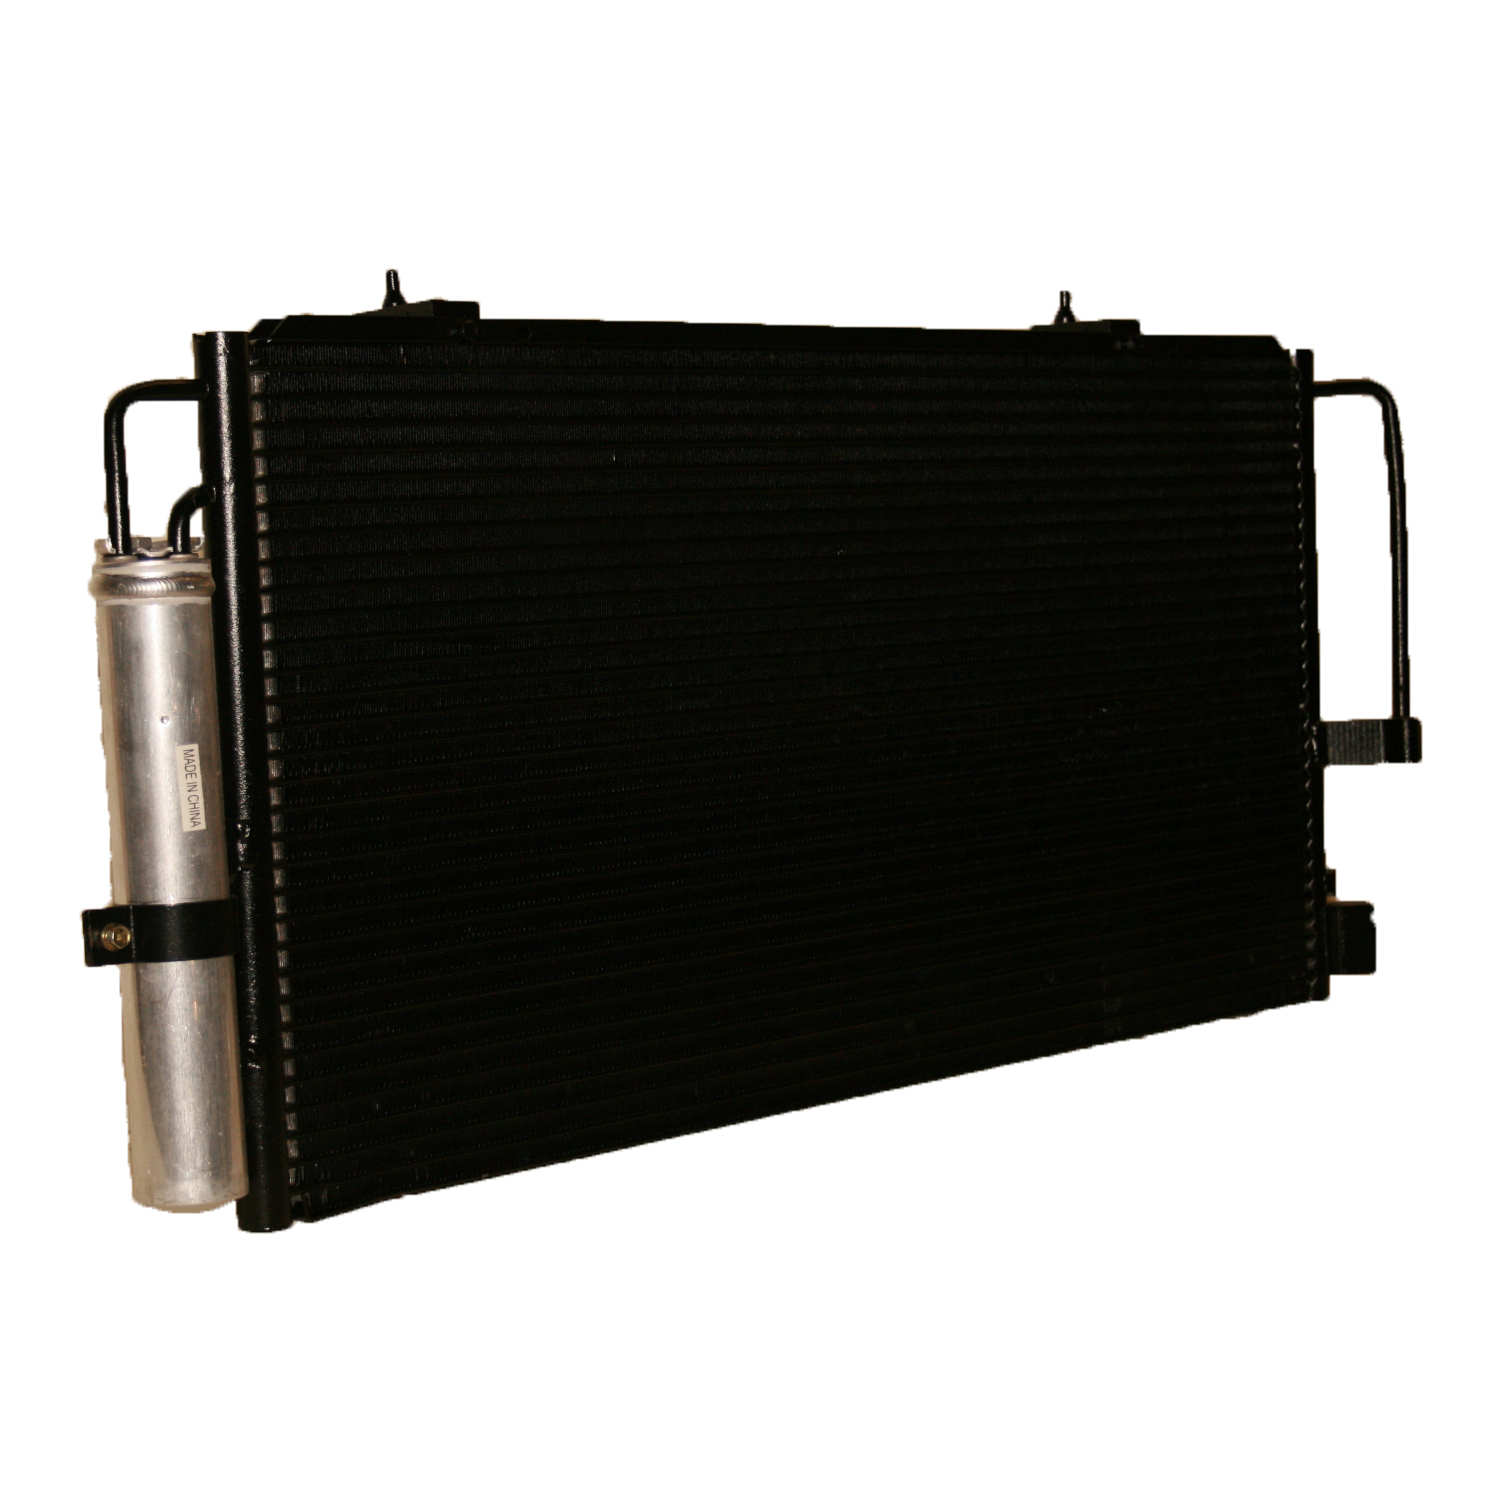 TCW Condenser 44-3392 New Product Image field_60b6a13a6e67c